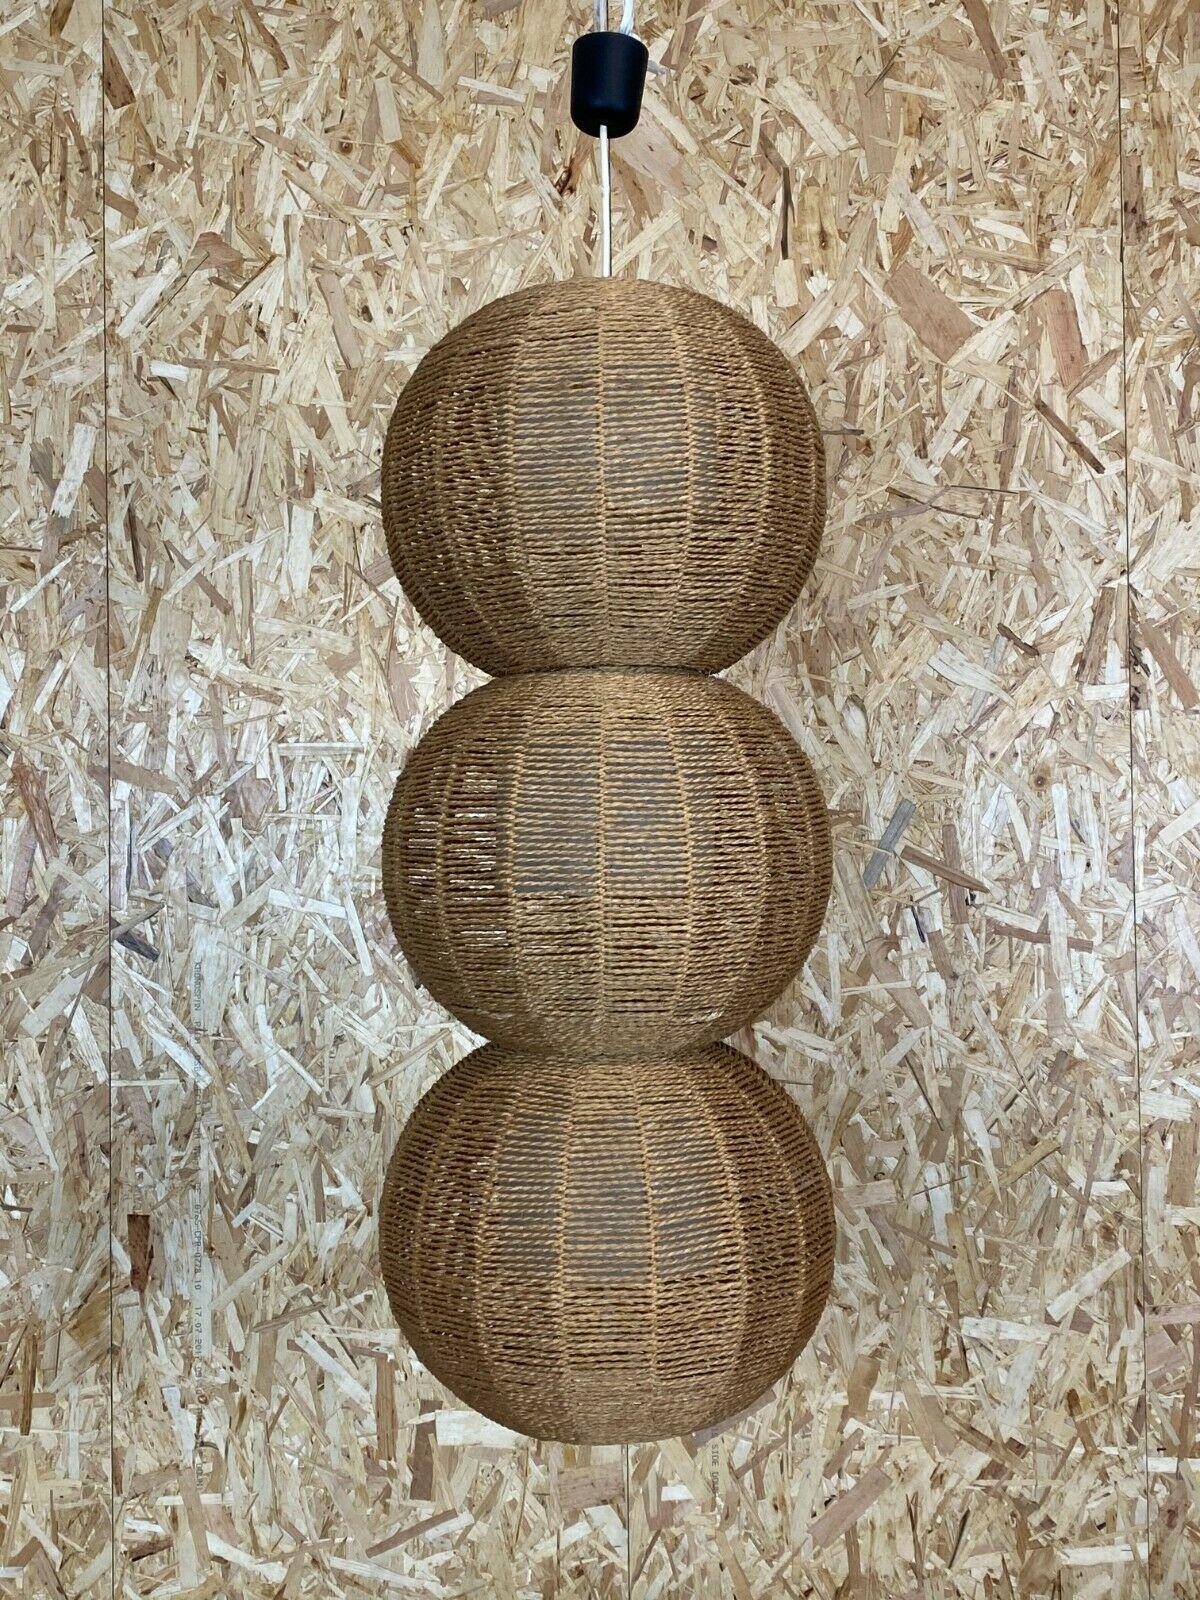 XL 60s 70s lamp lamp ball lamp raffia braid Space Age Design 60s

Object: spherical lamp

Manufacturer:

Condition: good

Age: around 1960-1970

Dimensions:

Diameter = 36cm
Height = 92cm

Other notes:

The pictures serve as part of